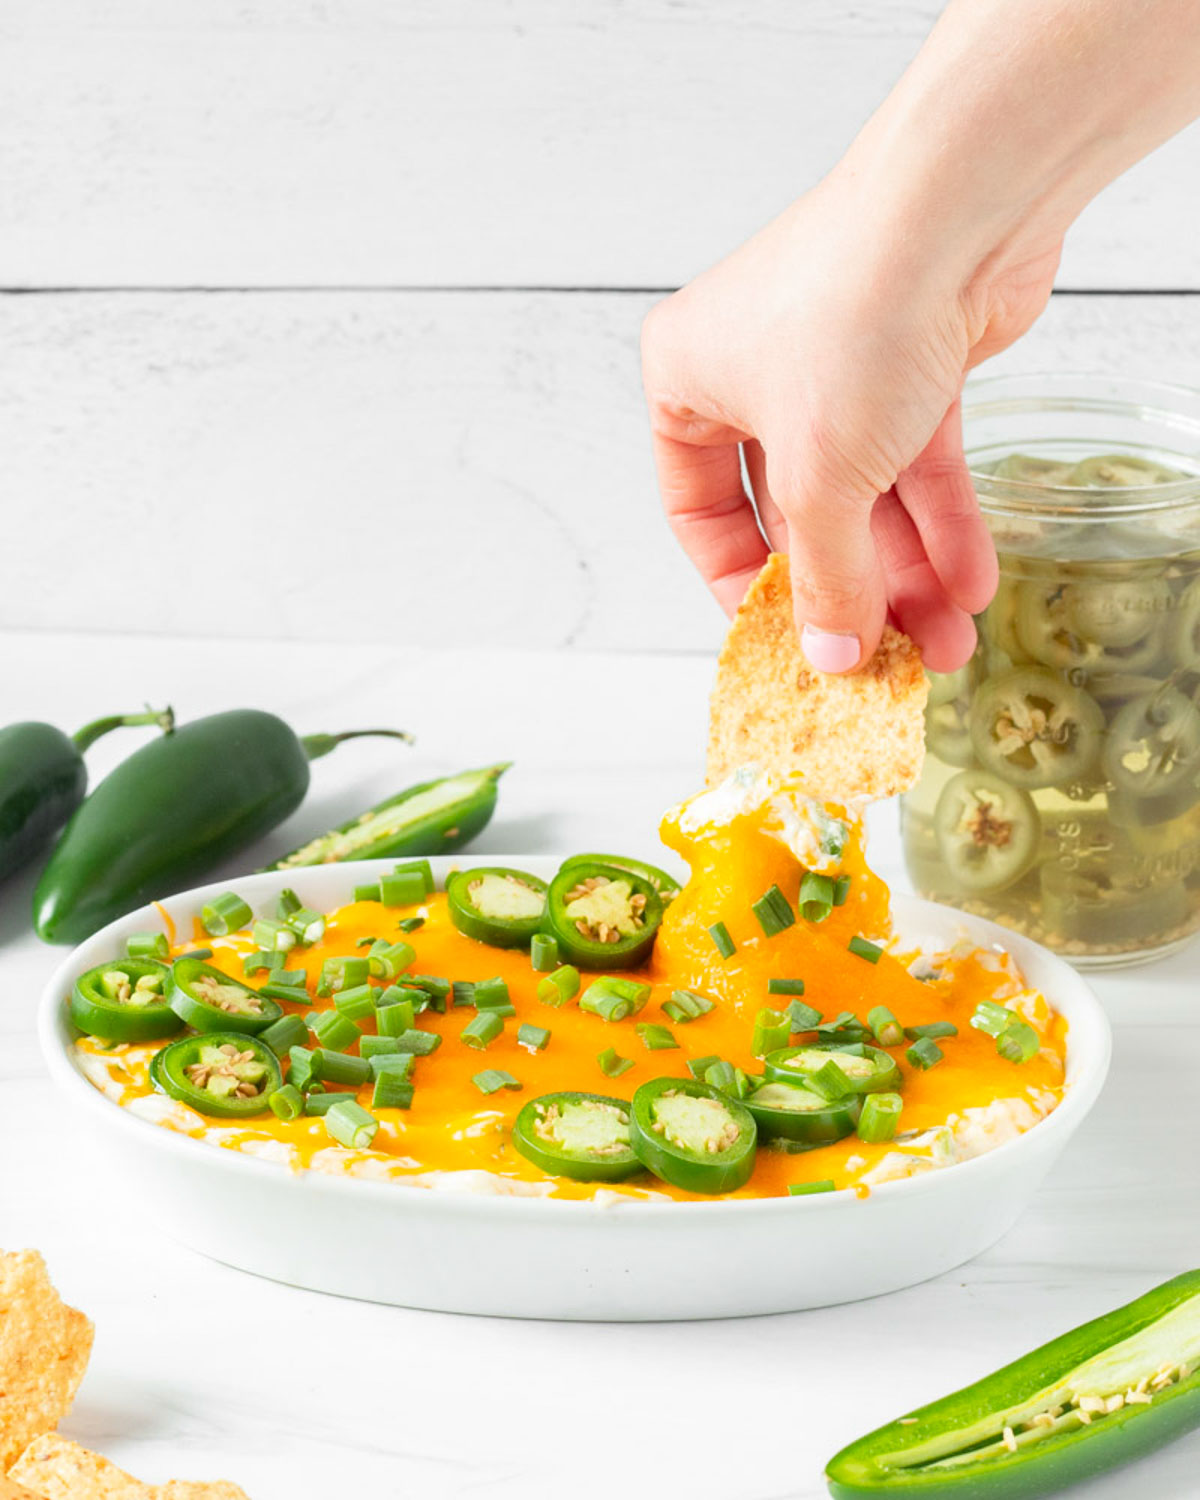 This jalapeno popper dip is a great game day appetizer and one of our favorite Super Bowl Sunday appetizer recipes. Made with classic jalapeno popper ingredients, this easy dip recipe is ready in 15-minutes for a quick and easy crowd-pleaser appetizer.